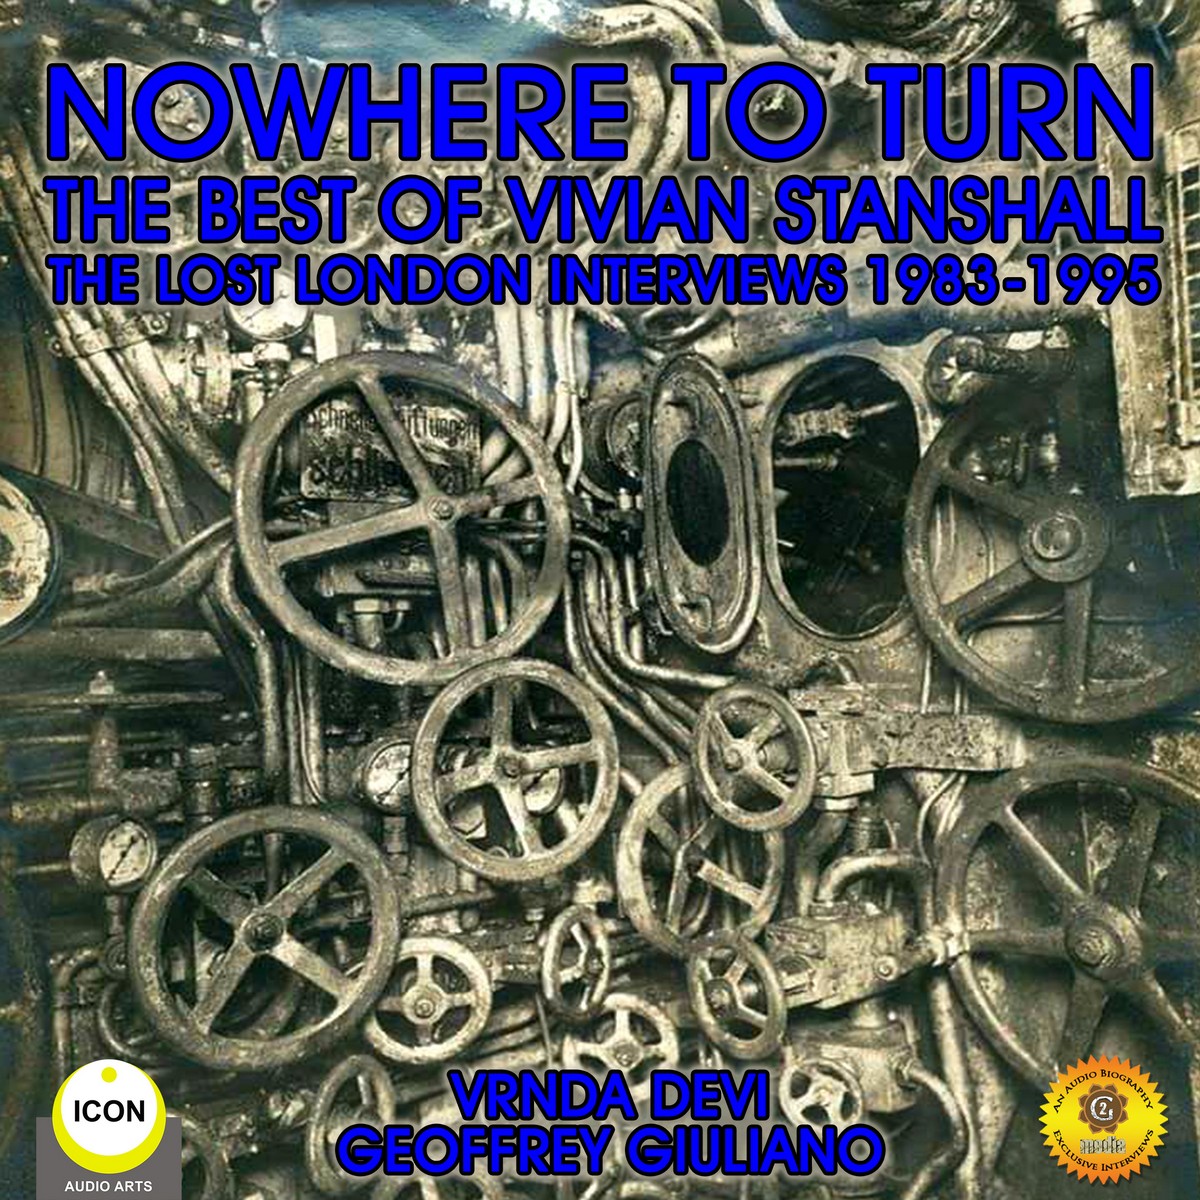 Nowhere to Turn – the Best of Vivian Stanshall